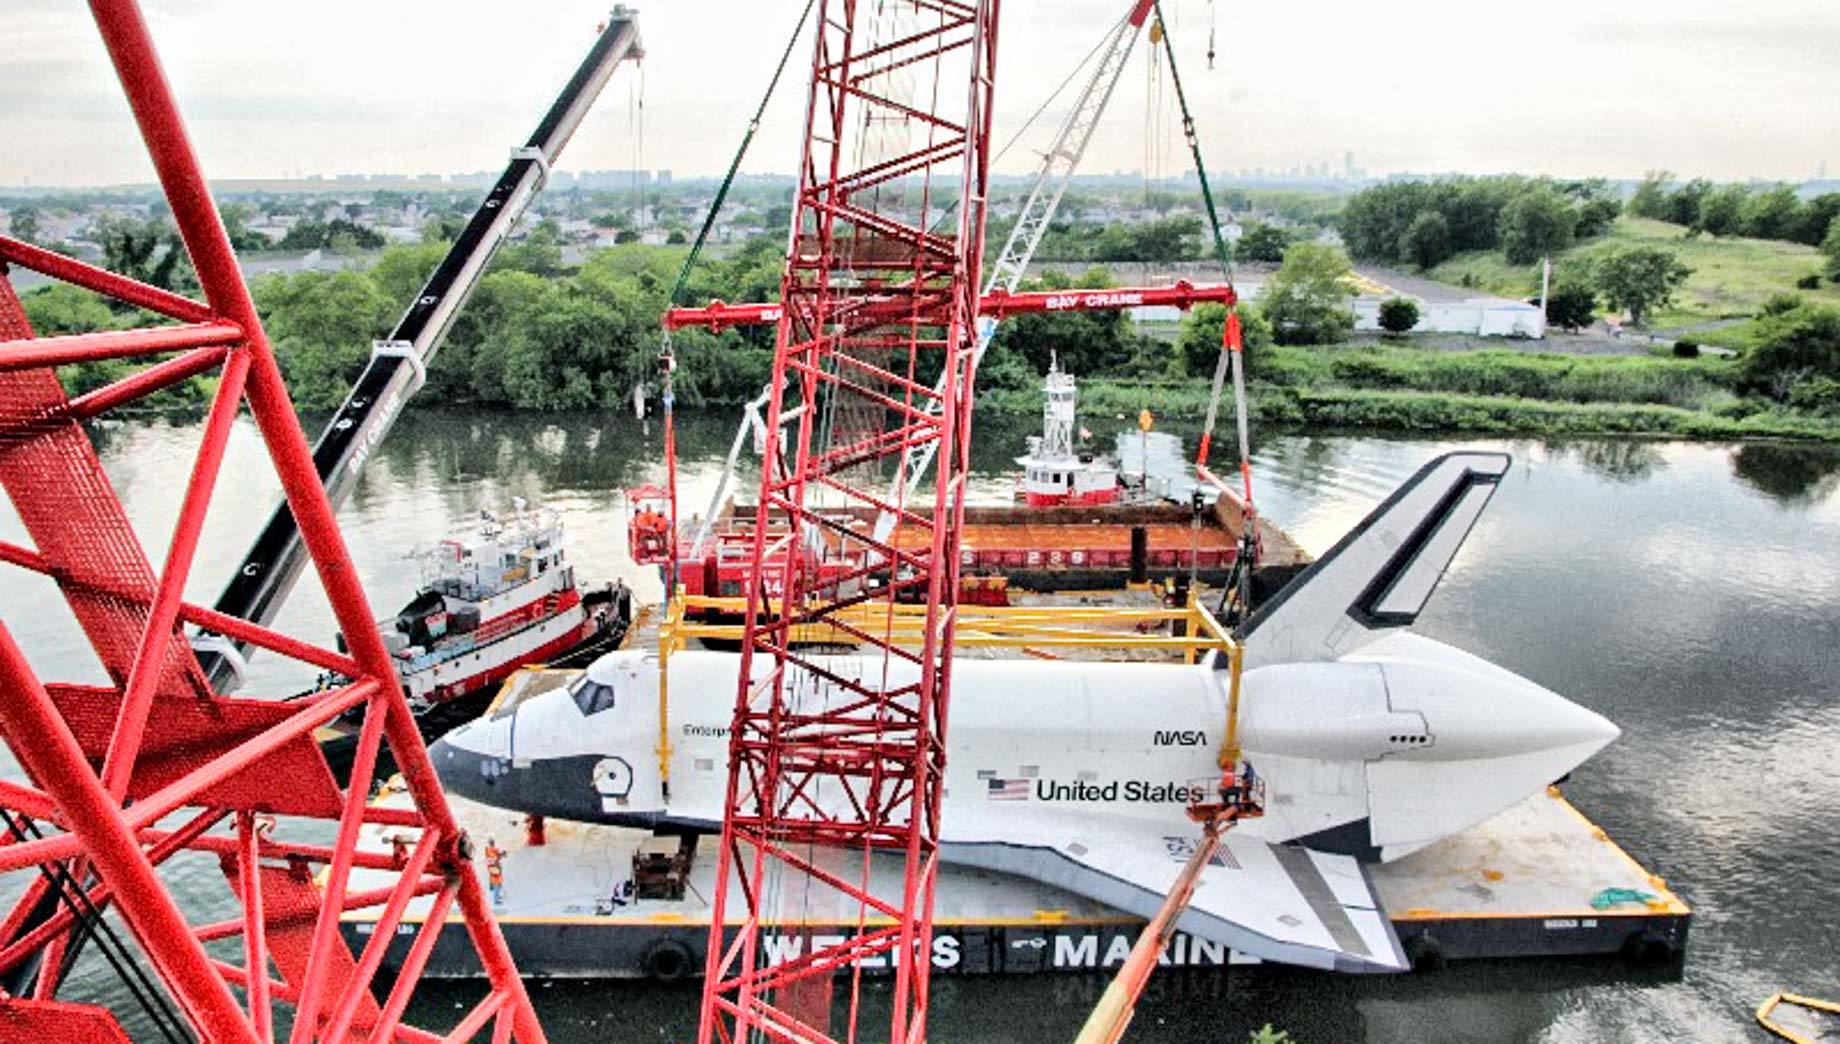 Cranes and space shuttle on river